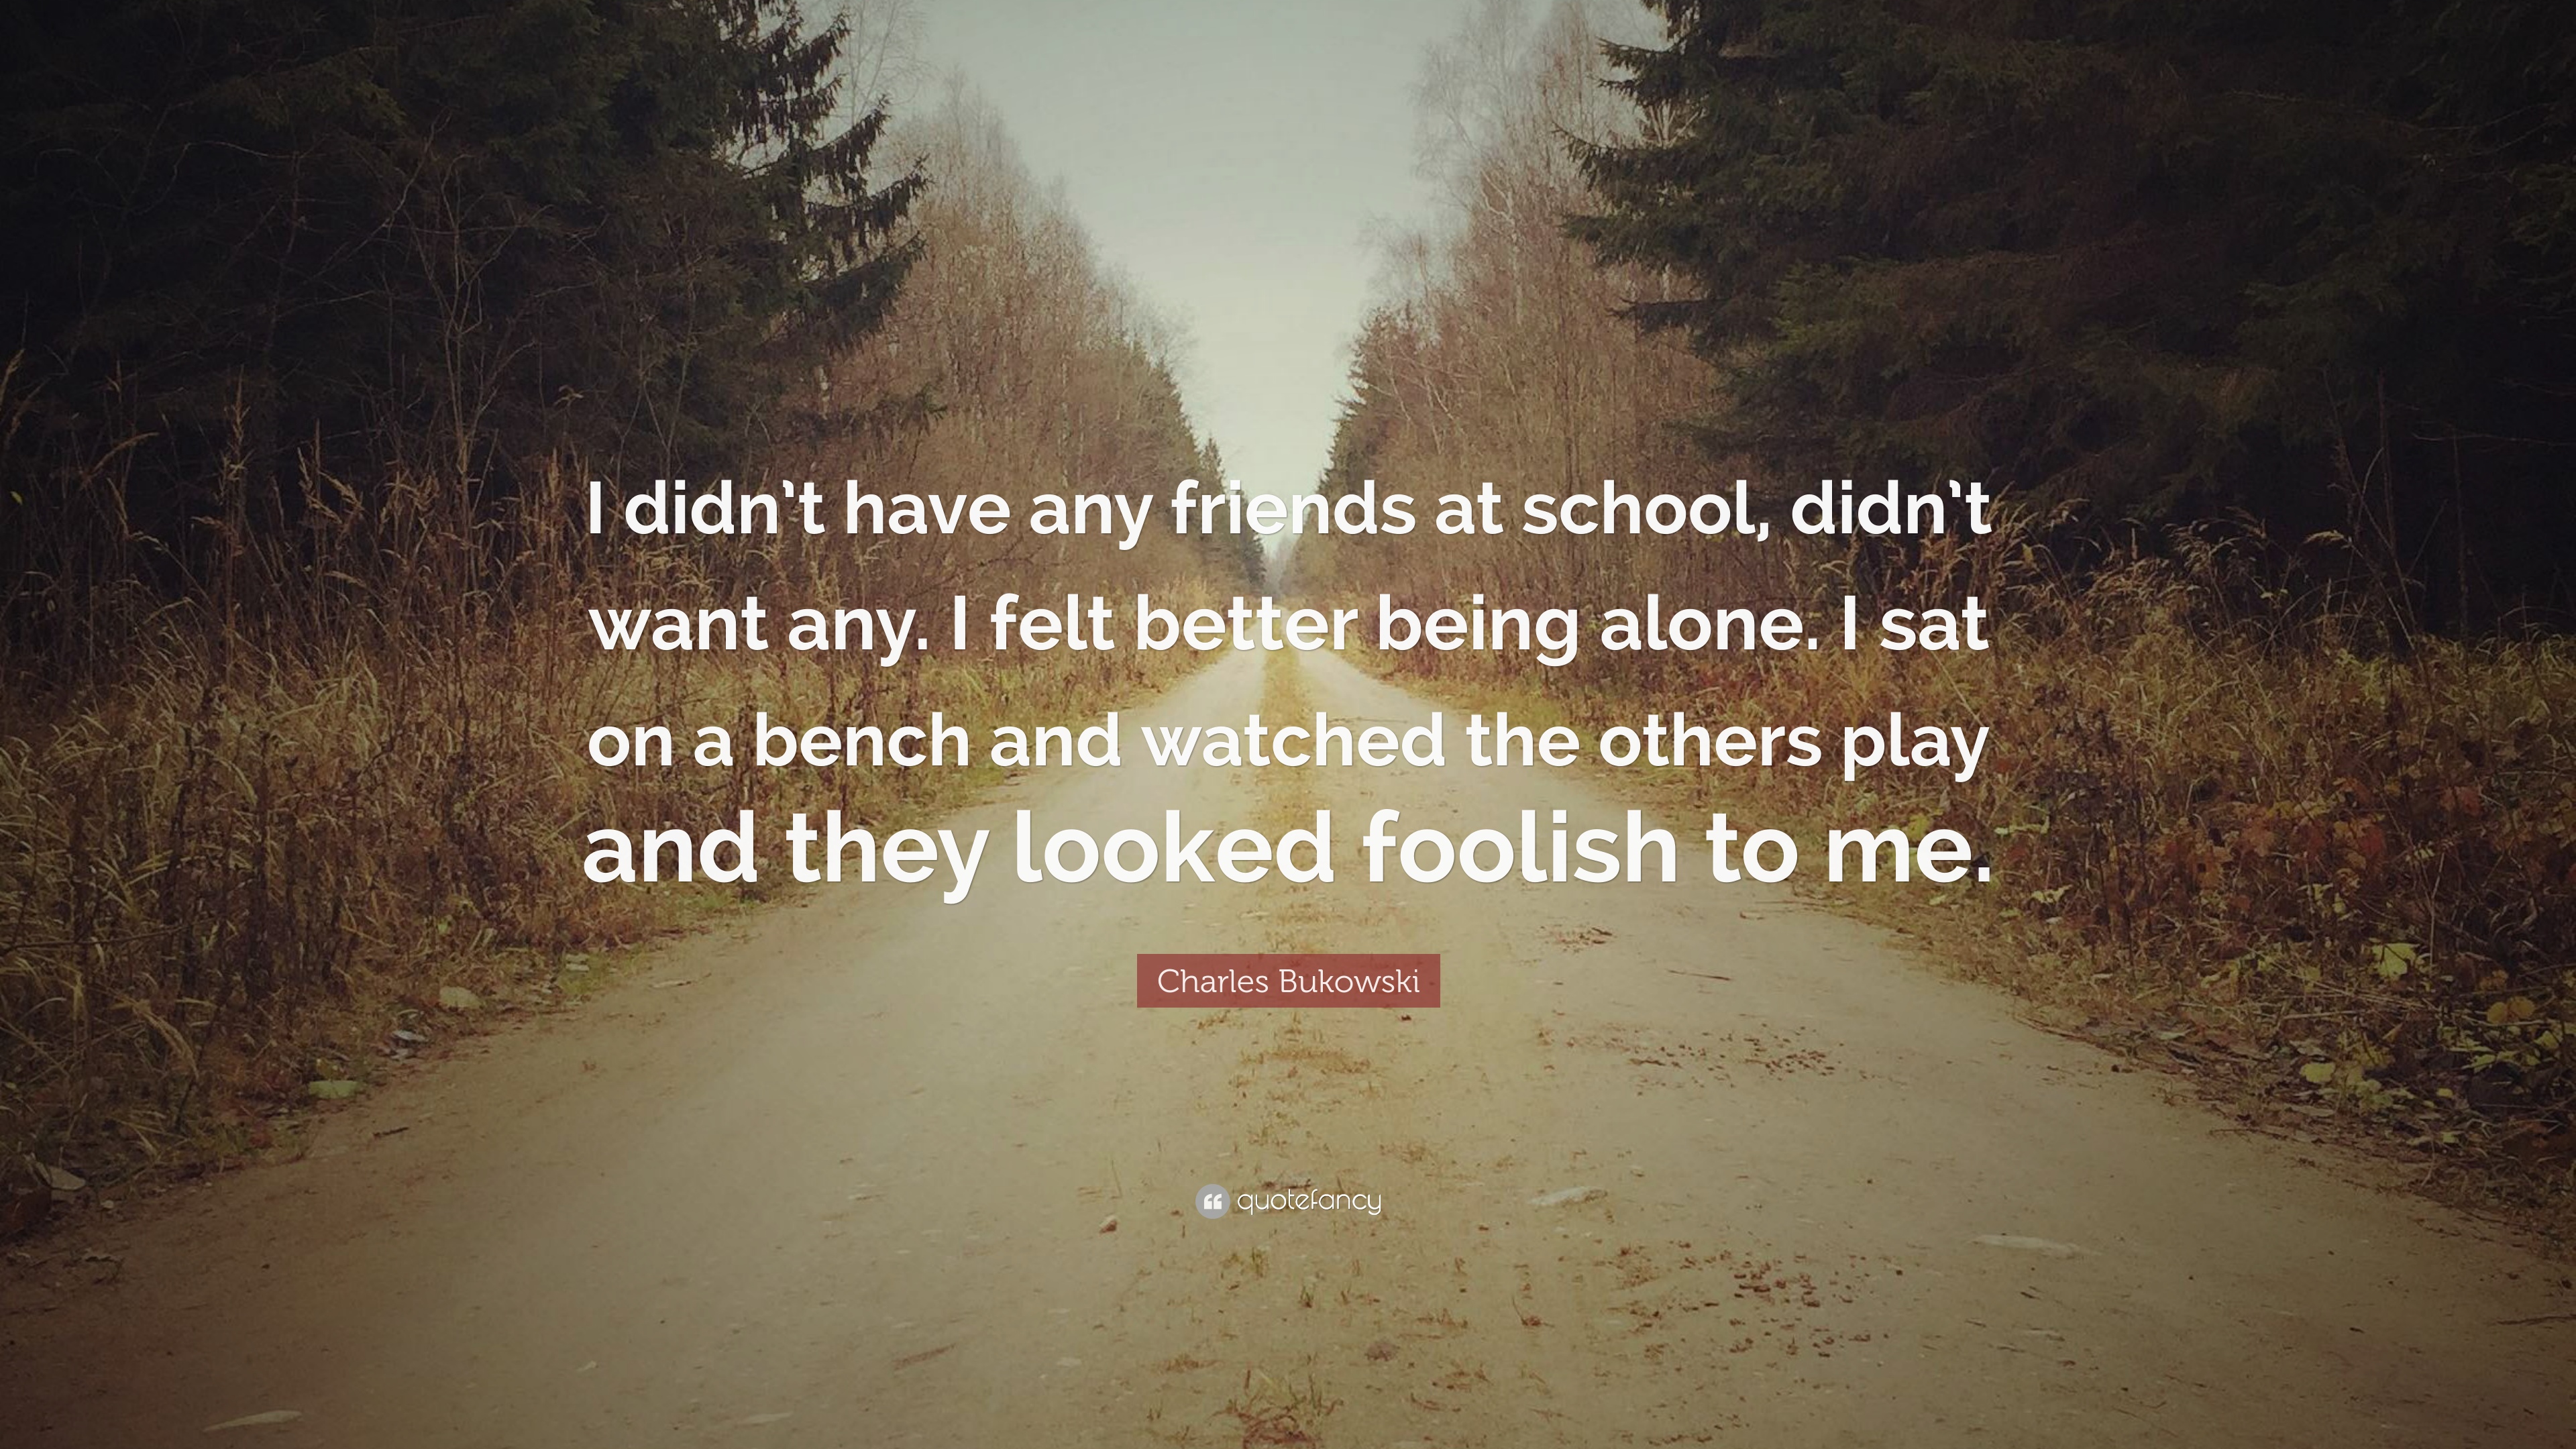 Charles Bukowski Quote: “I didn't have any friends at school, didn't